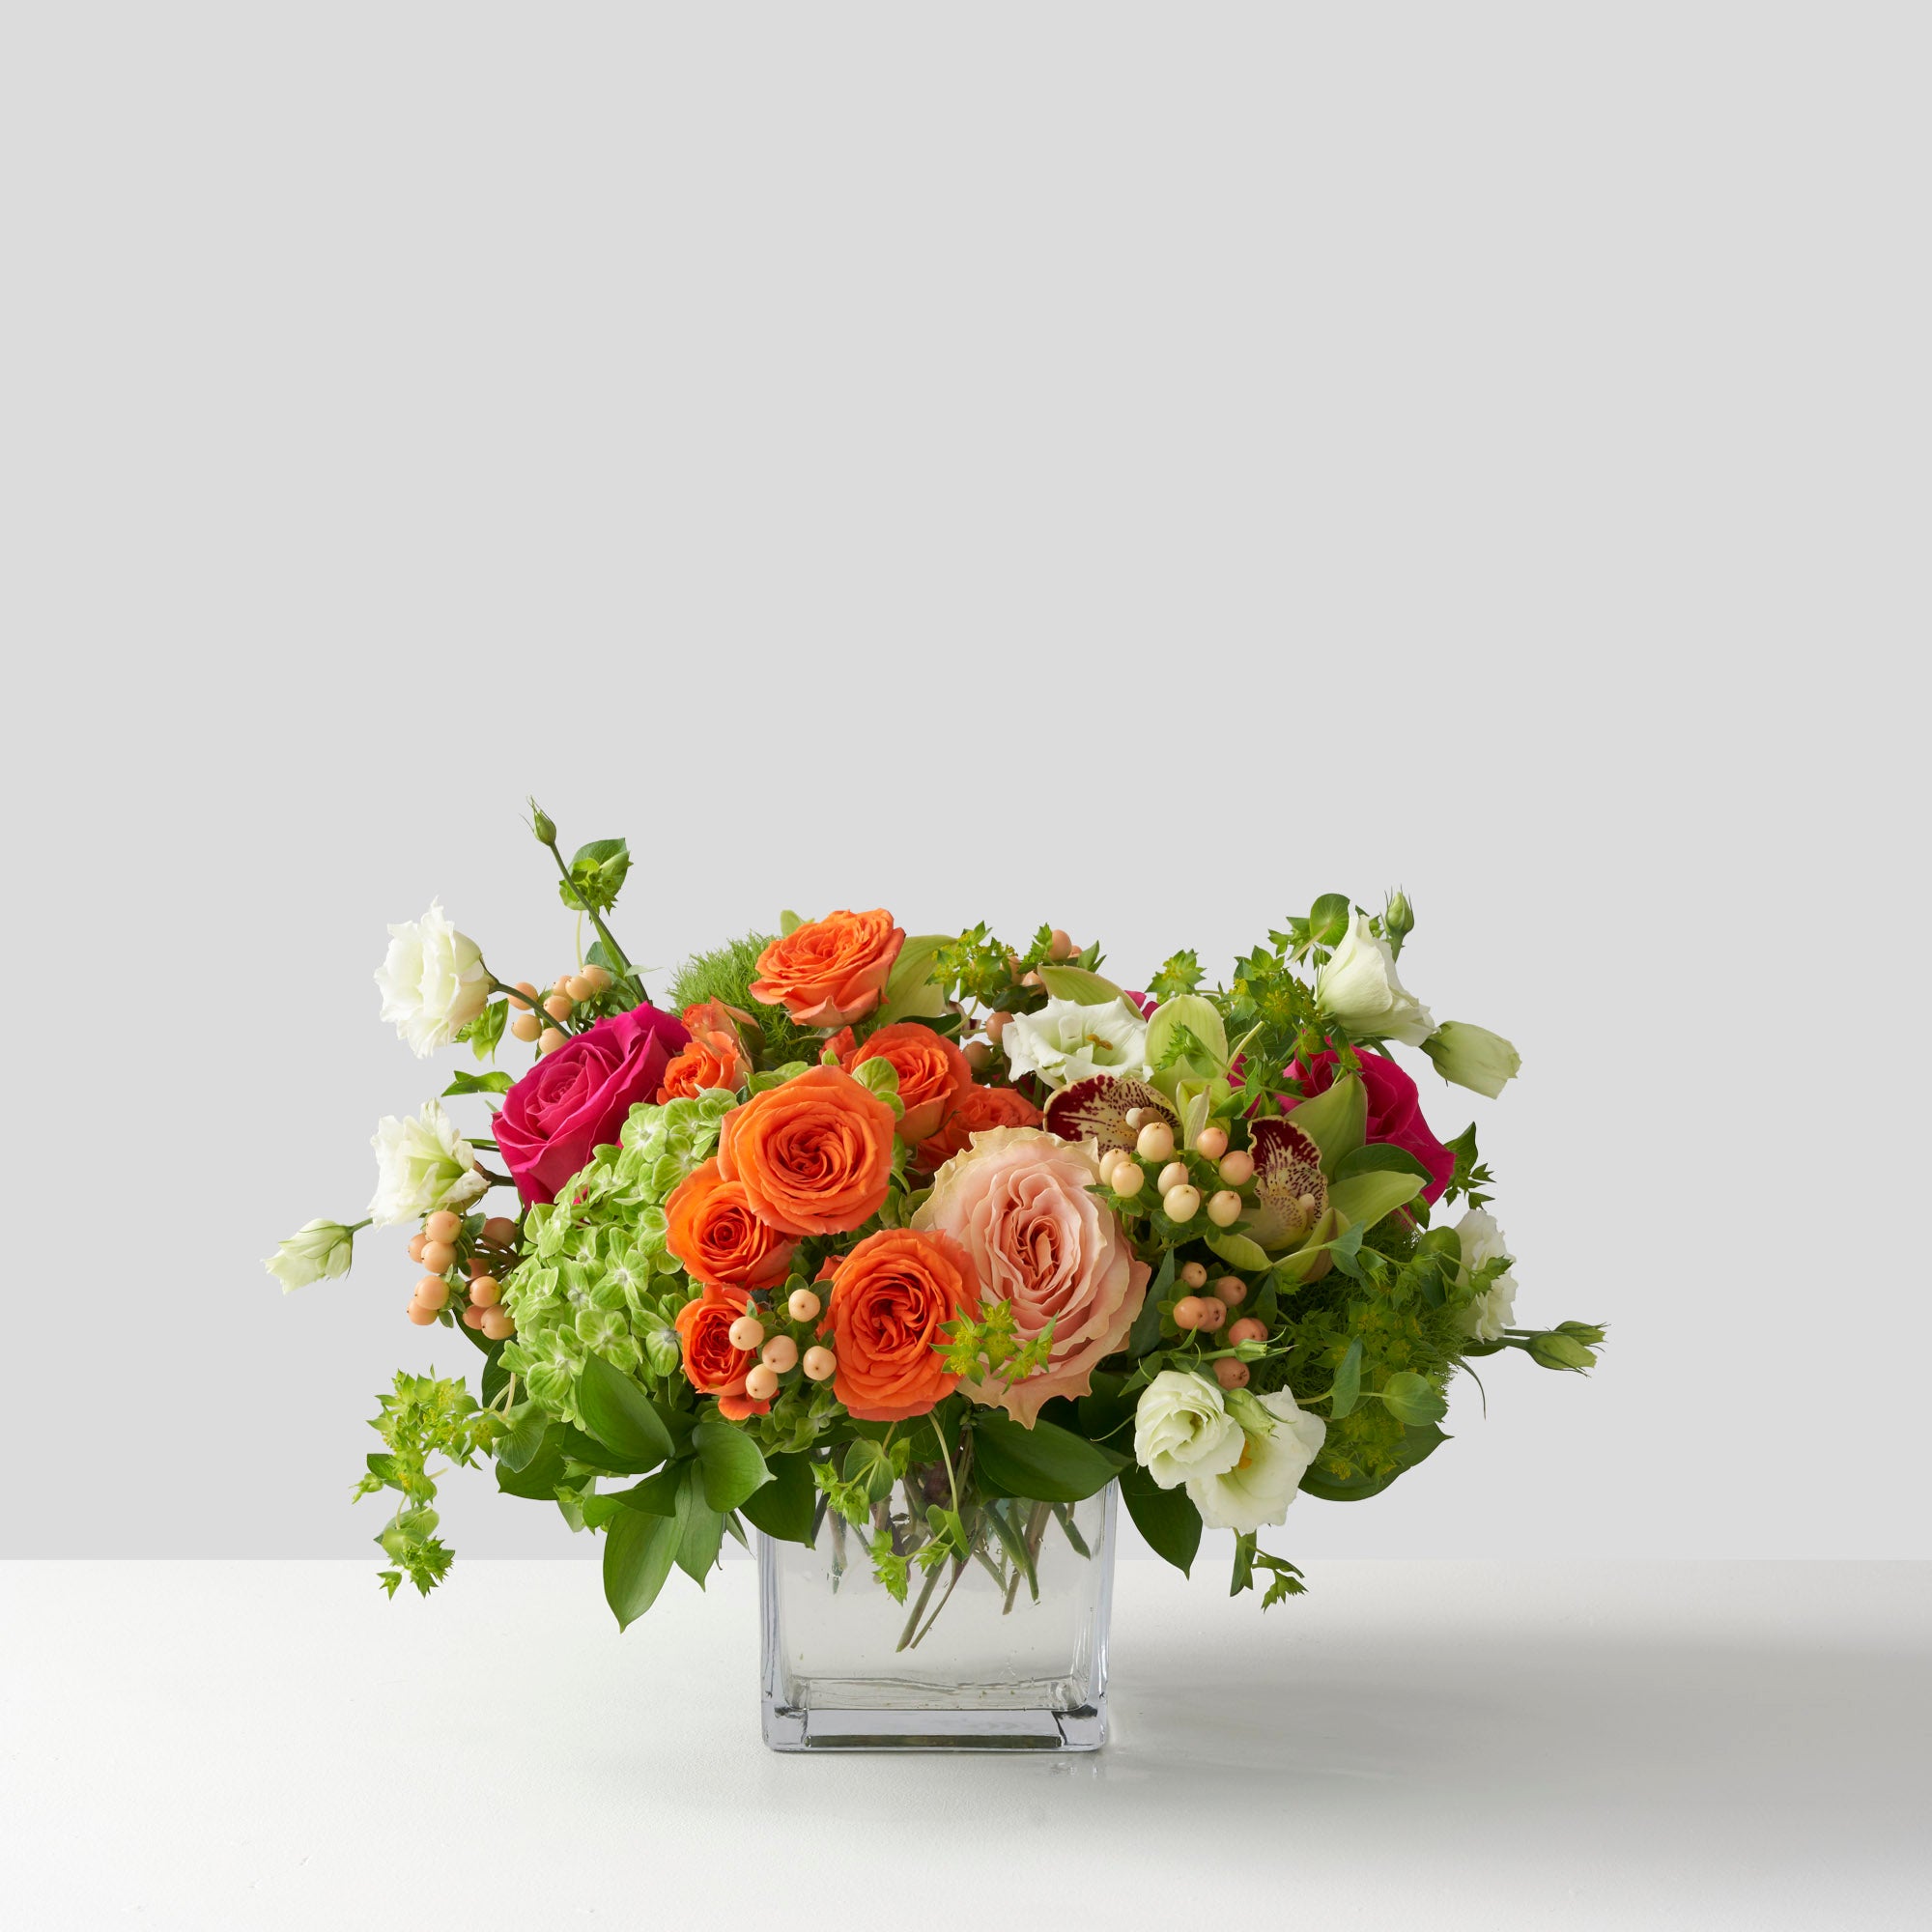 LIme green, orange, hot pink, pale pink flowers arranged in glass vase on white backgound.